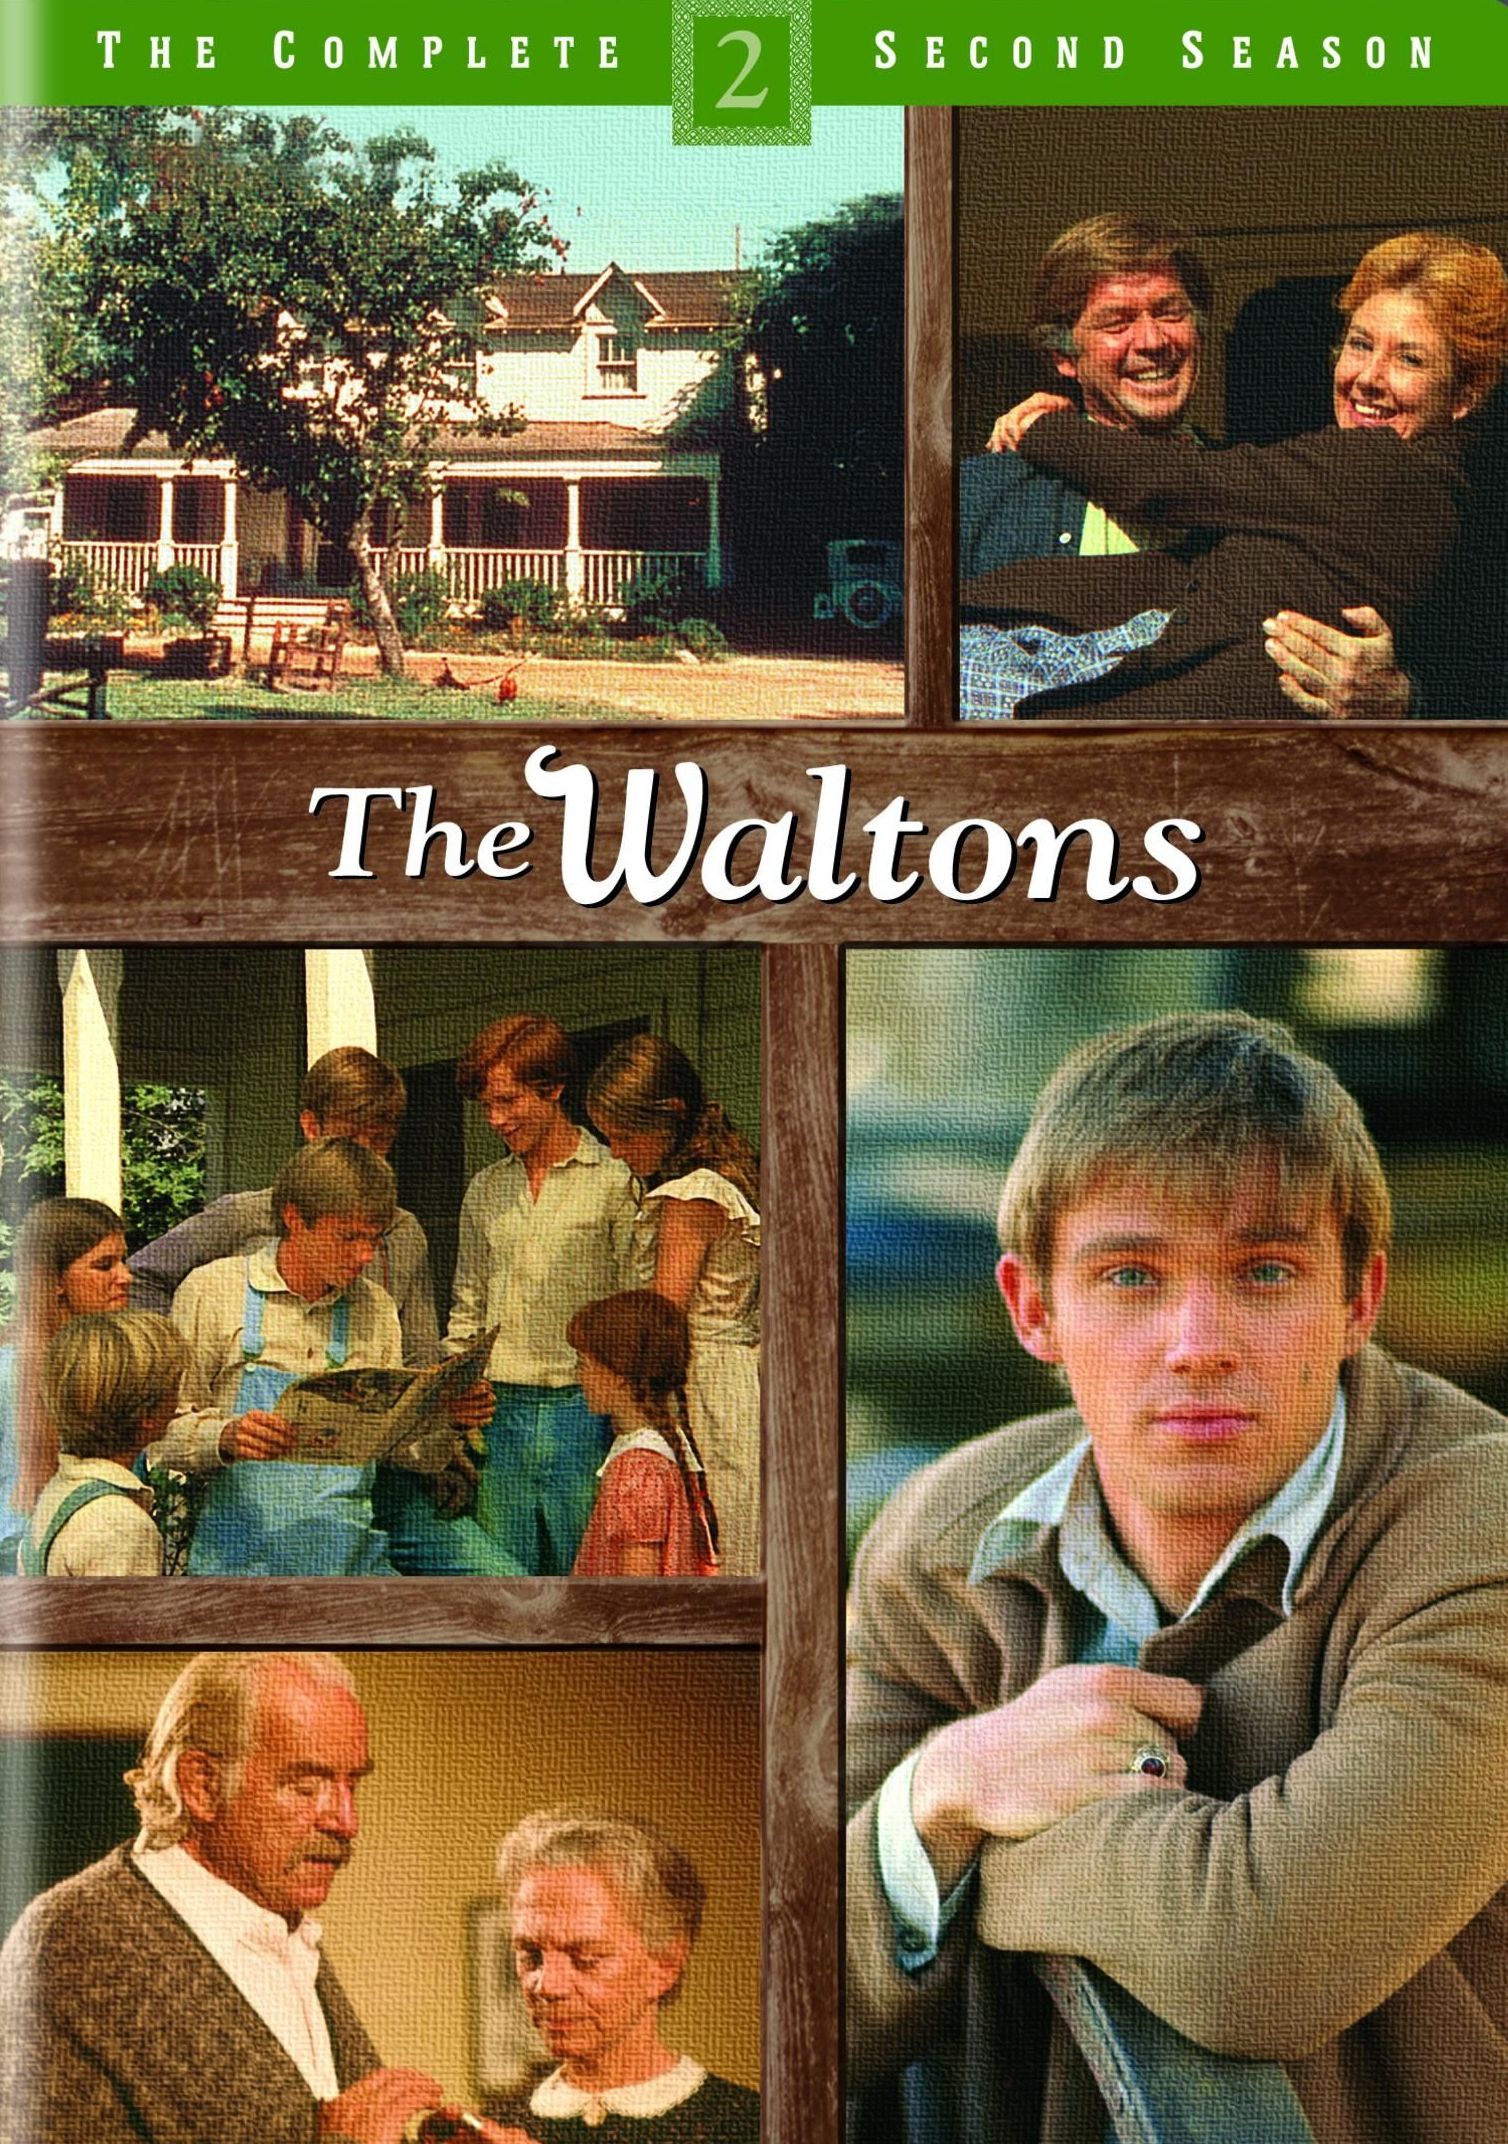 The Way Of The Waltons